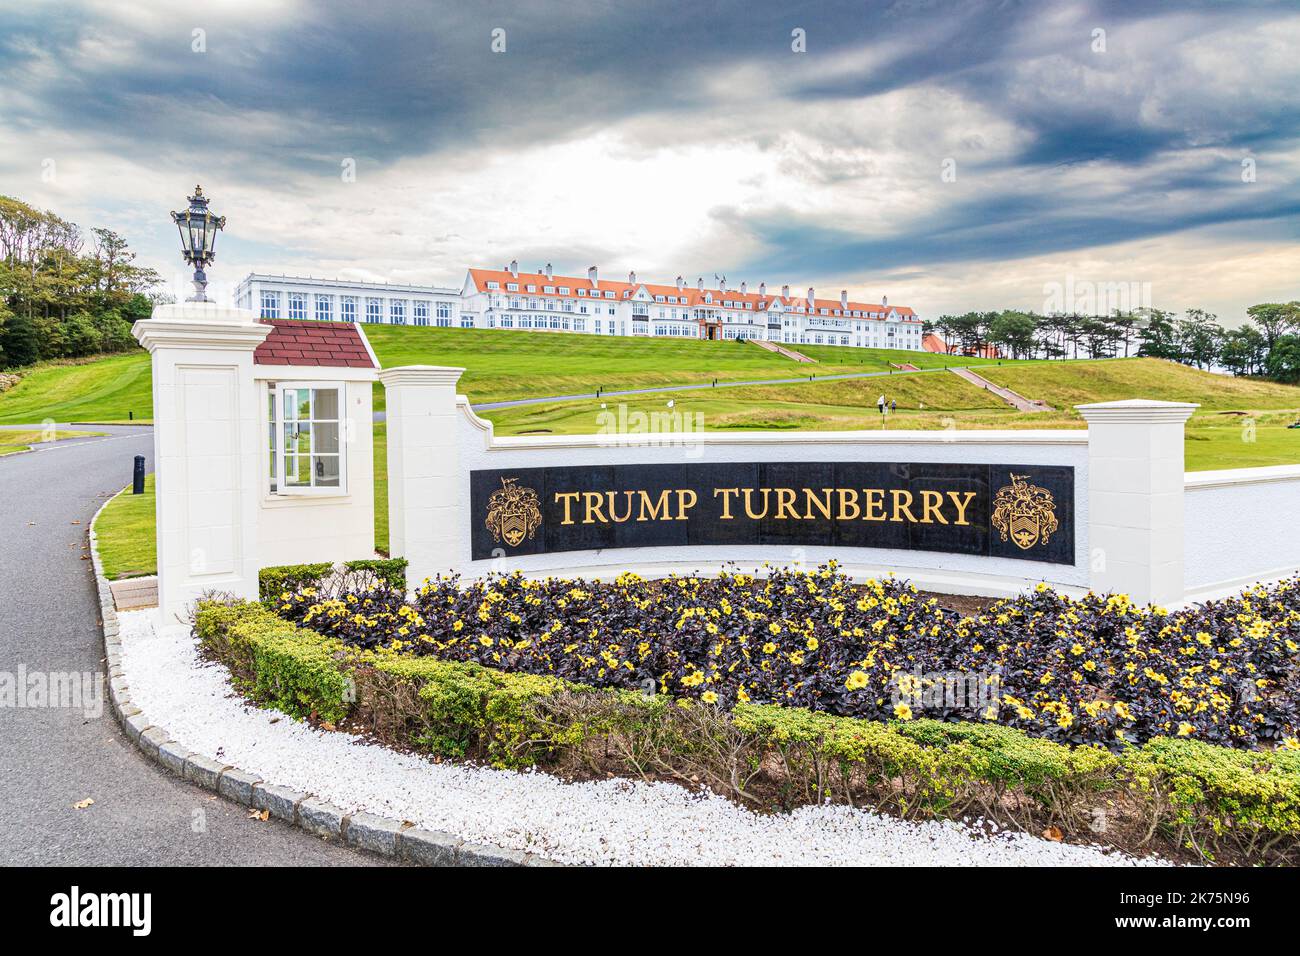 Trump Turnberry Hotel and Golf Course owned by the Trump Organisation at Turnberry near Girvan, South Ayrshire, Scotland UK Stock Photo